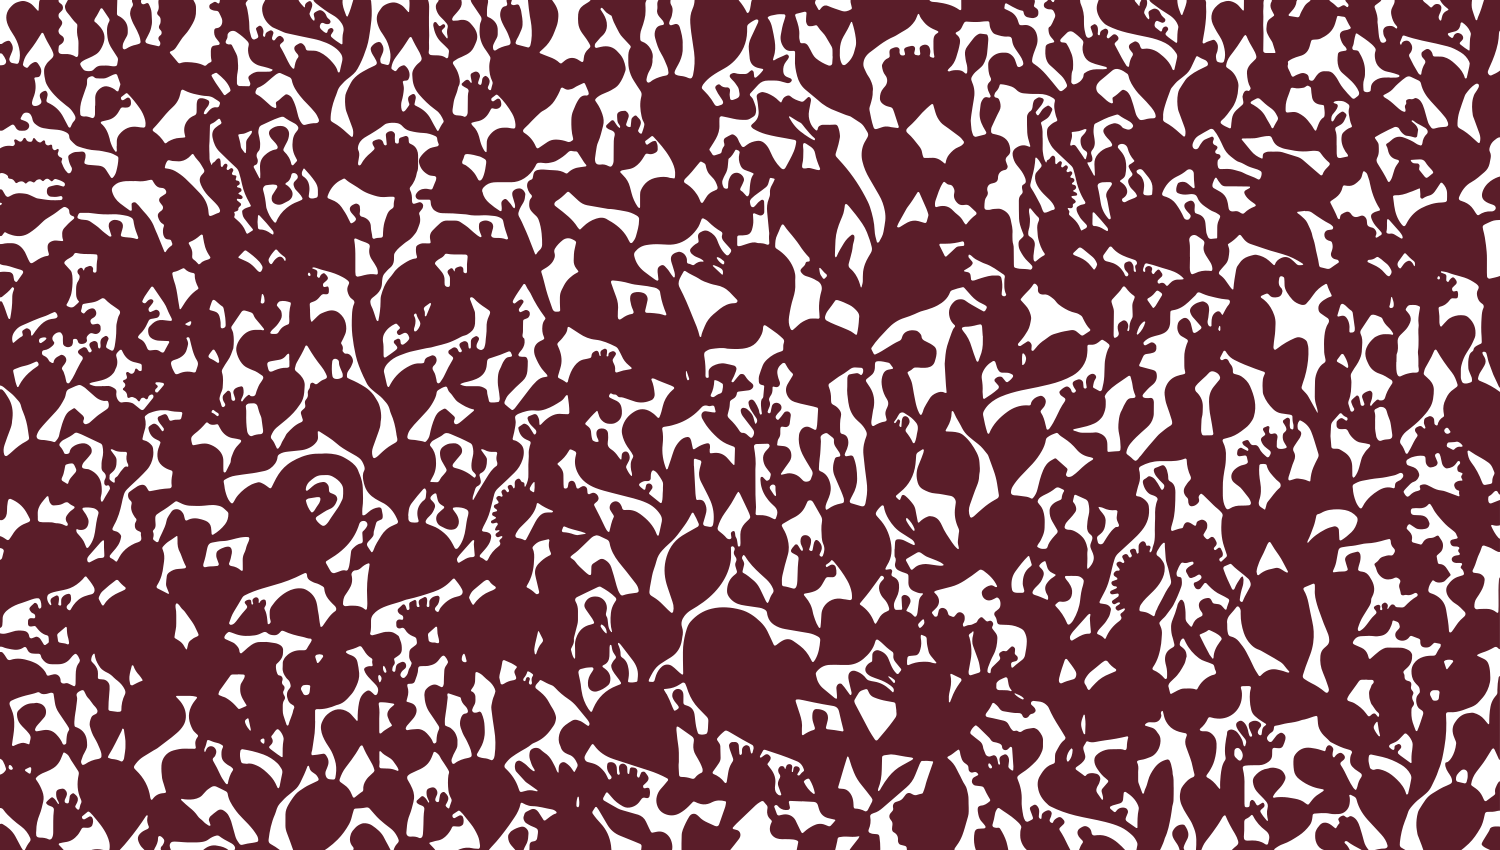 Parasoleil™ Anderson Ranch© pattern displayed with a burgundy color overlay